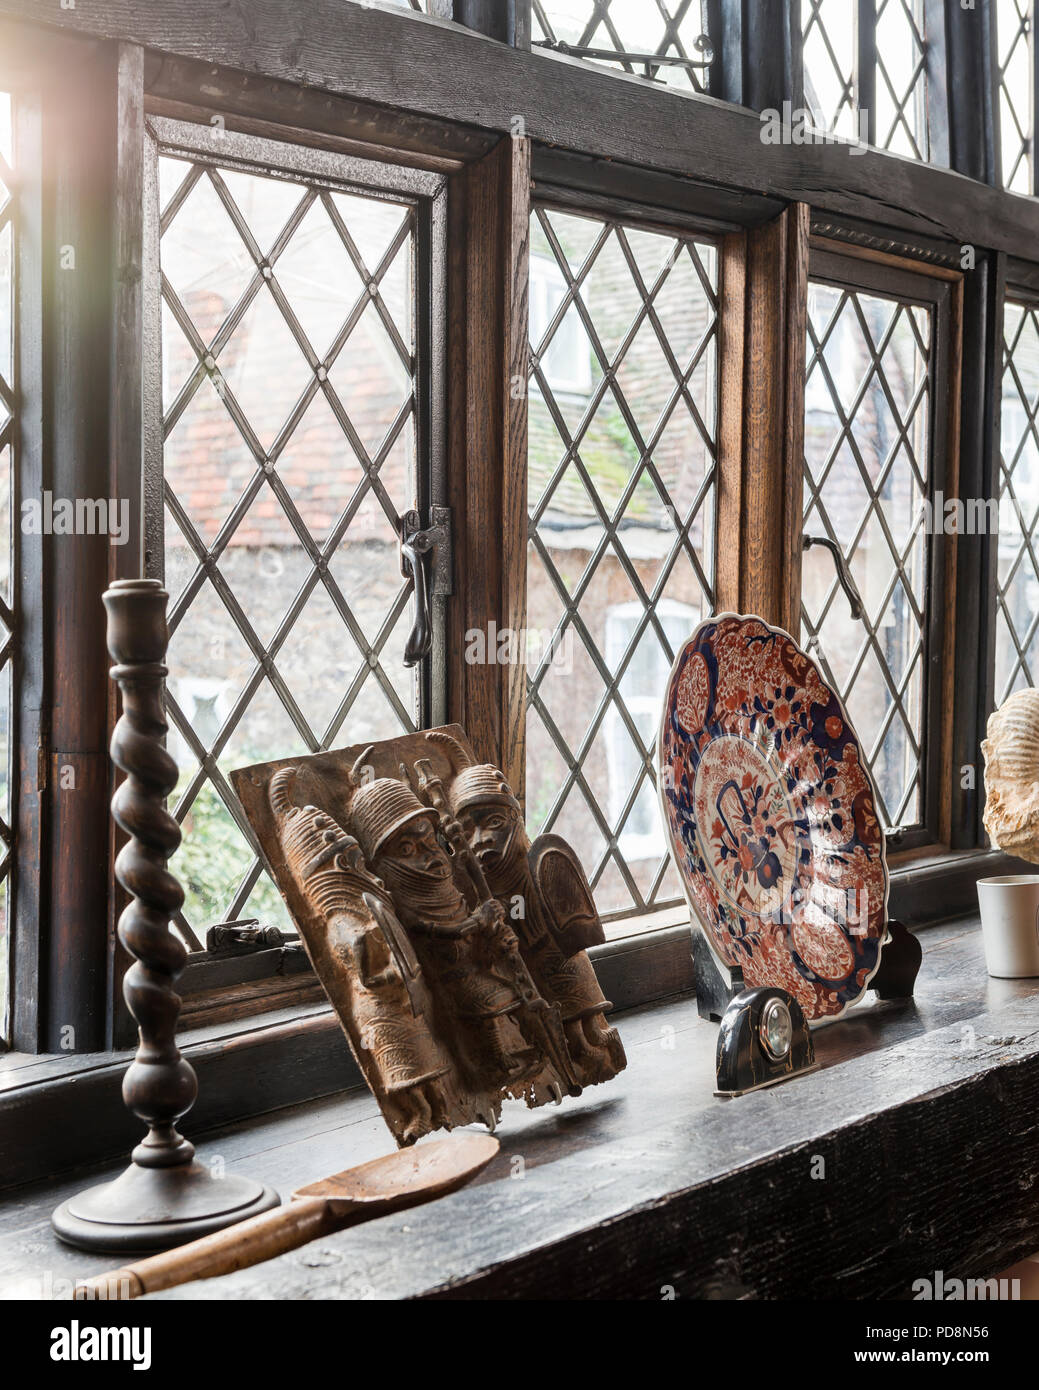 Decorative plate and ornaments on leaded glass windowsill Stock Photo